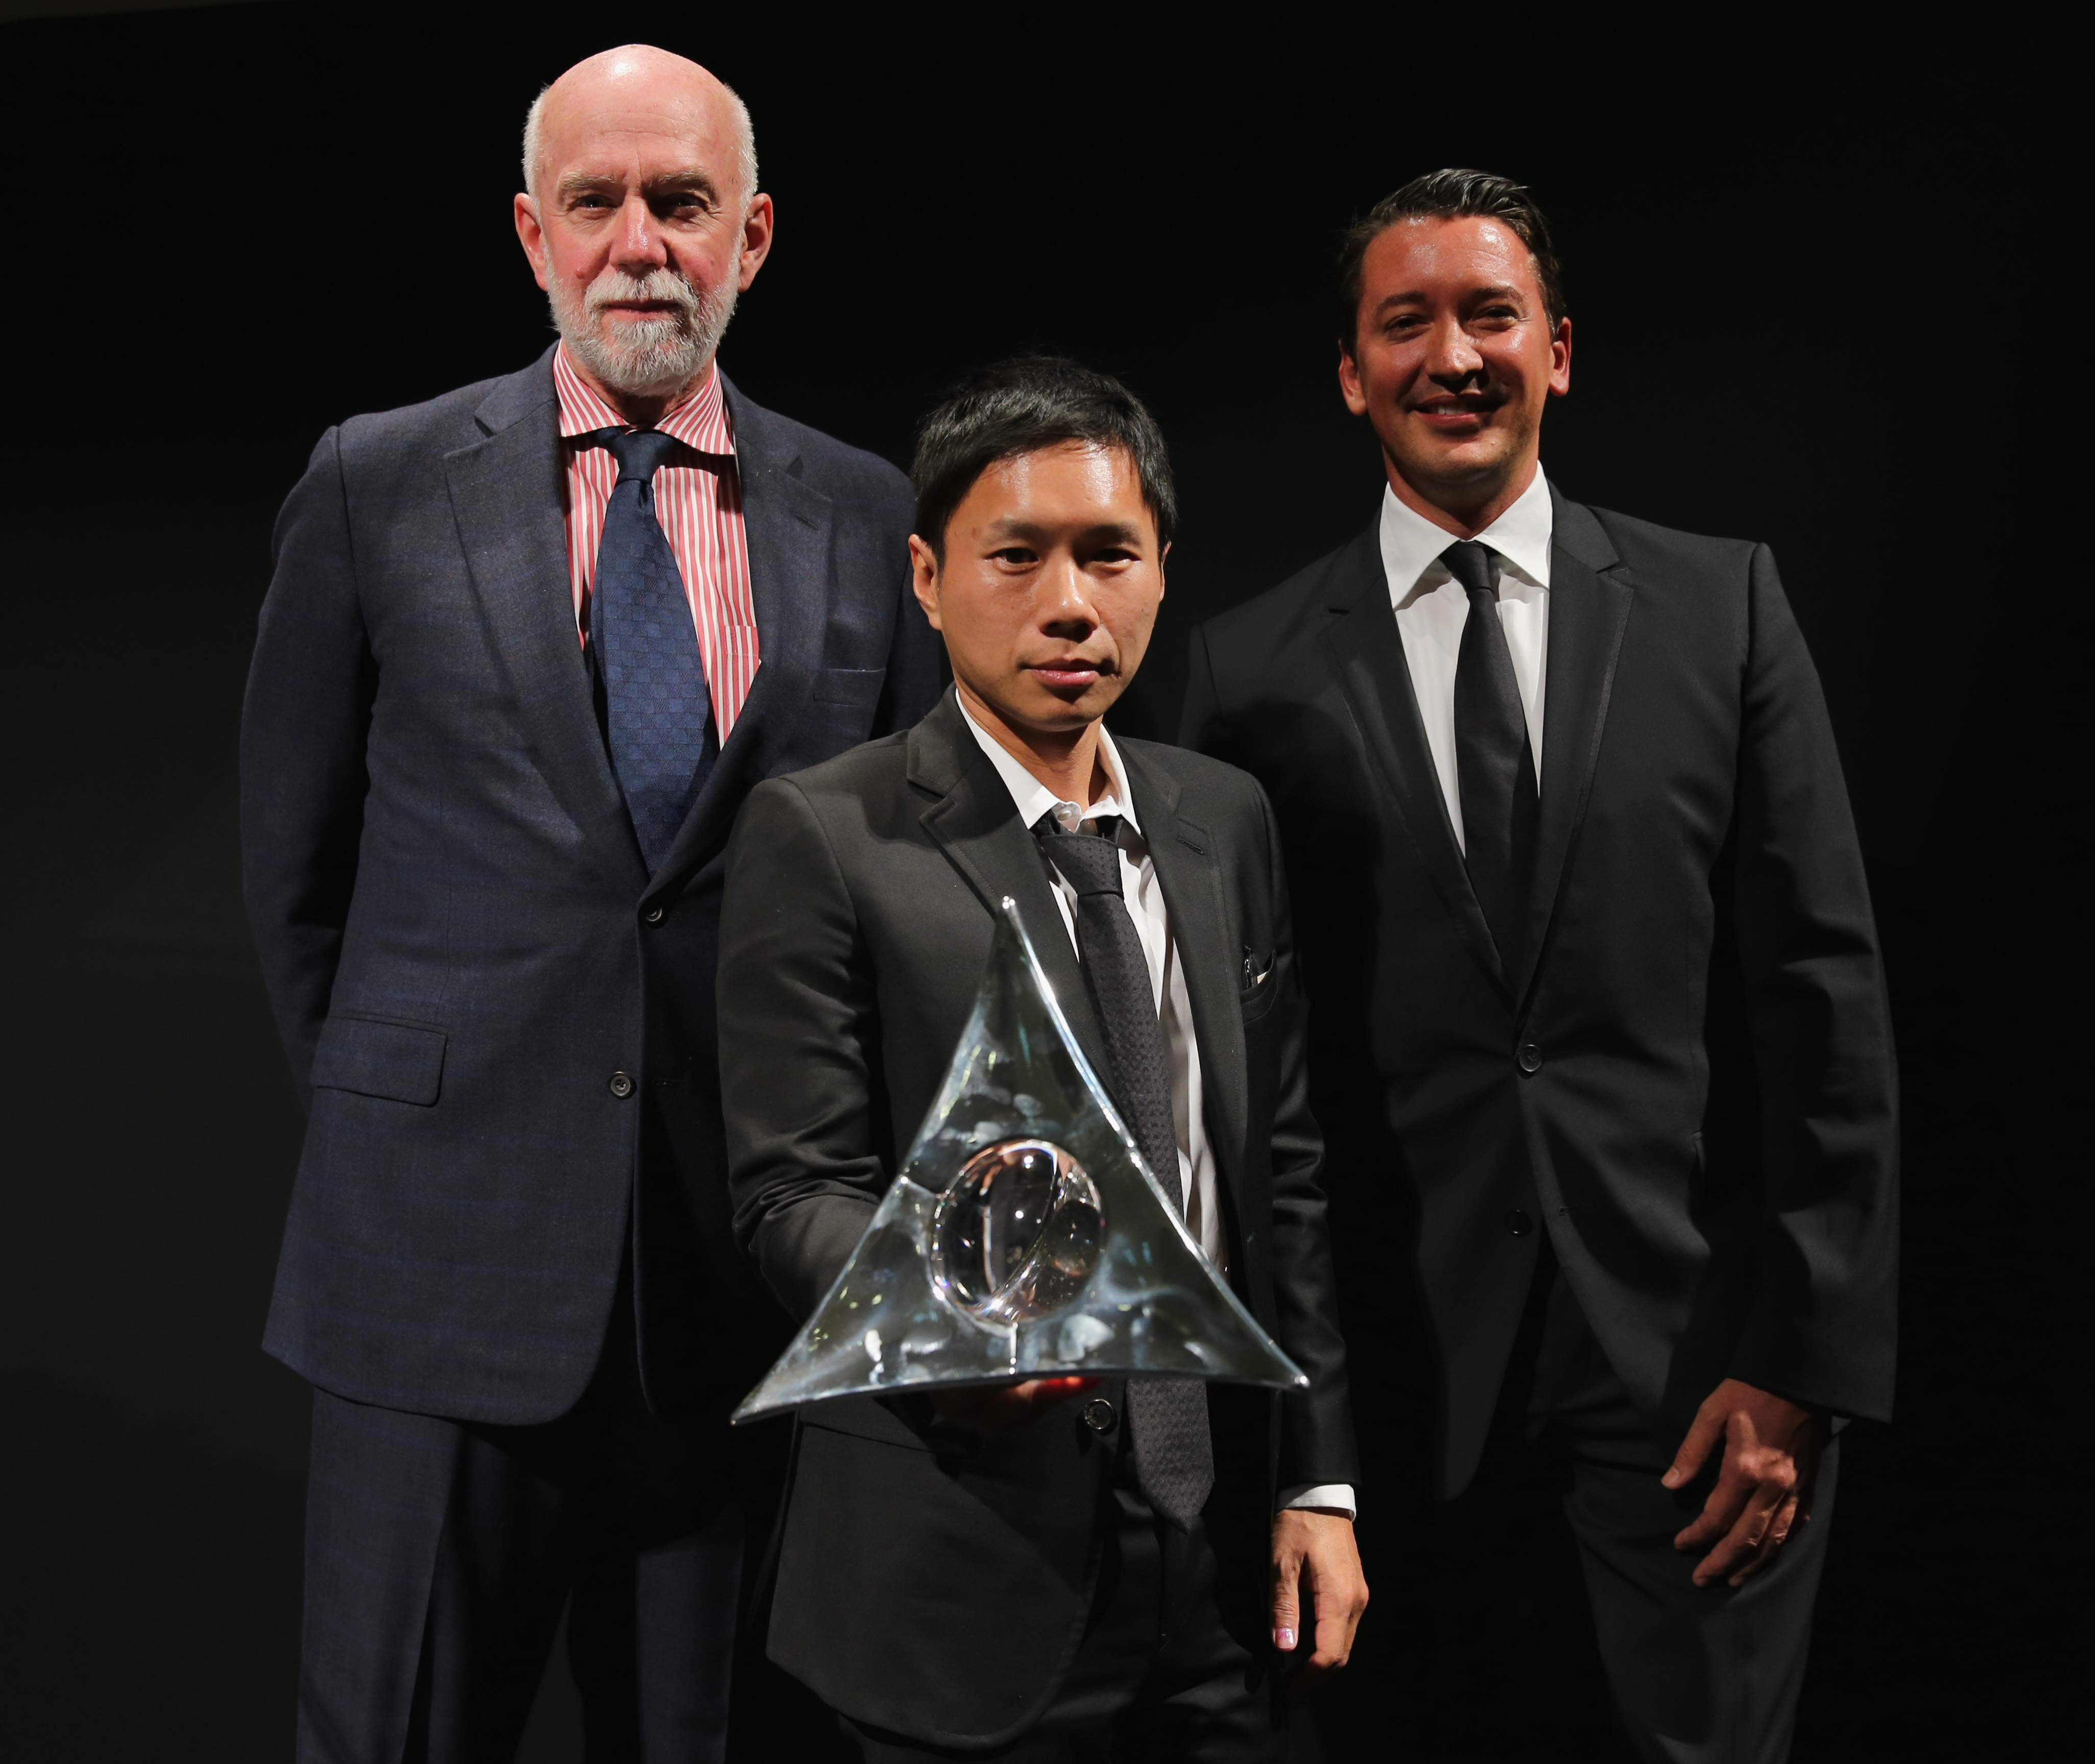 THE NEW WINNER OF THE HUGO BOSS PRIZE 2014 HAS BEEN REVEALED